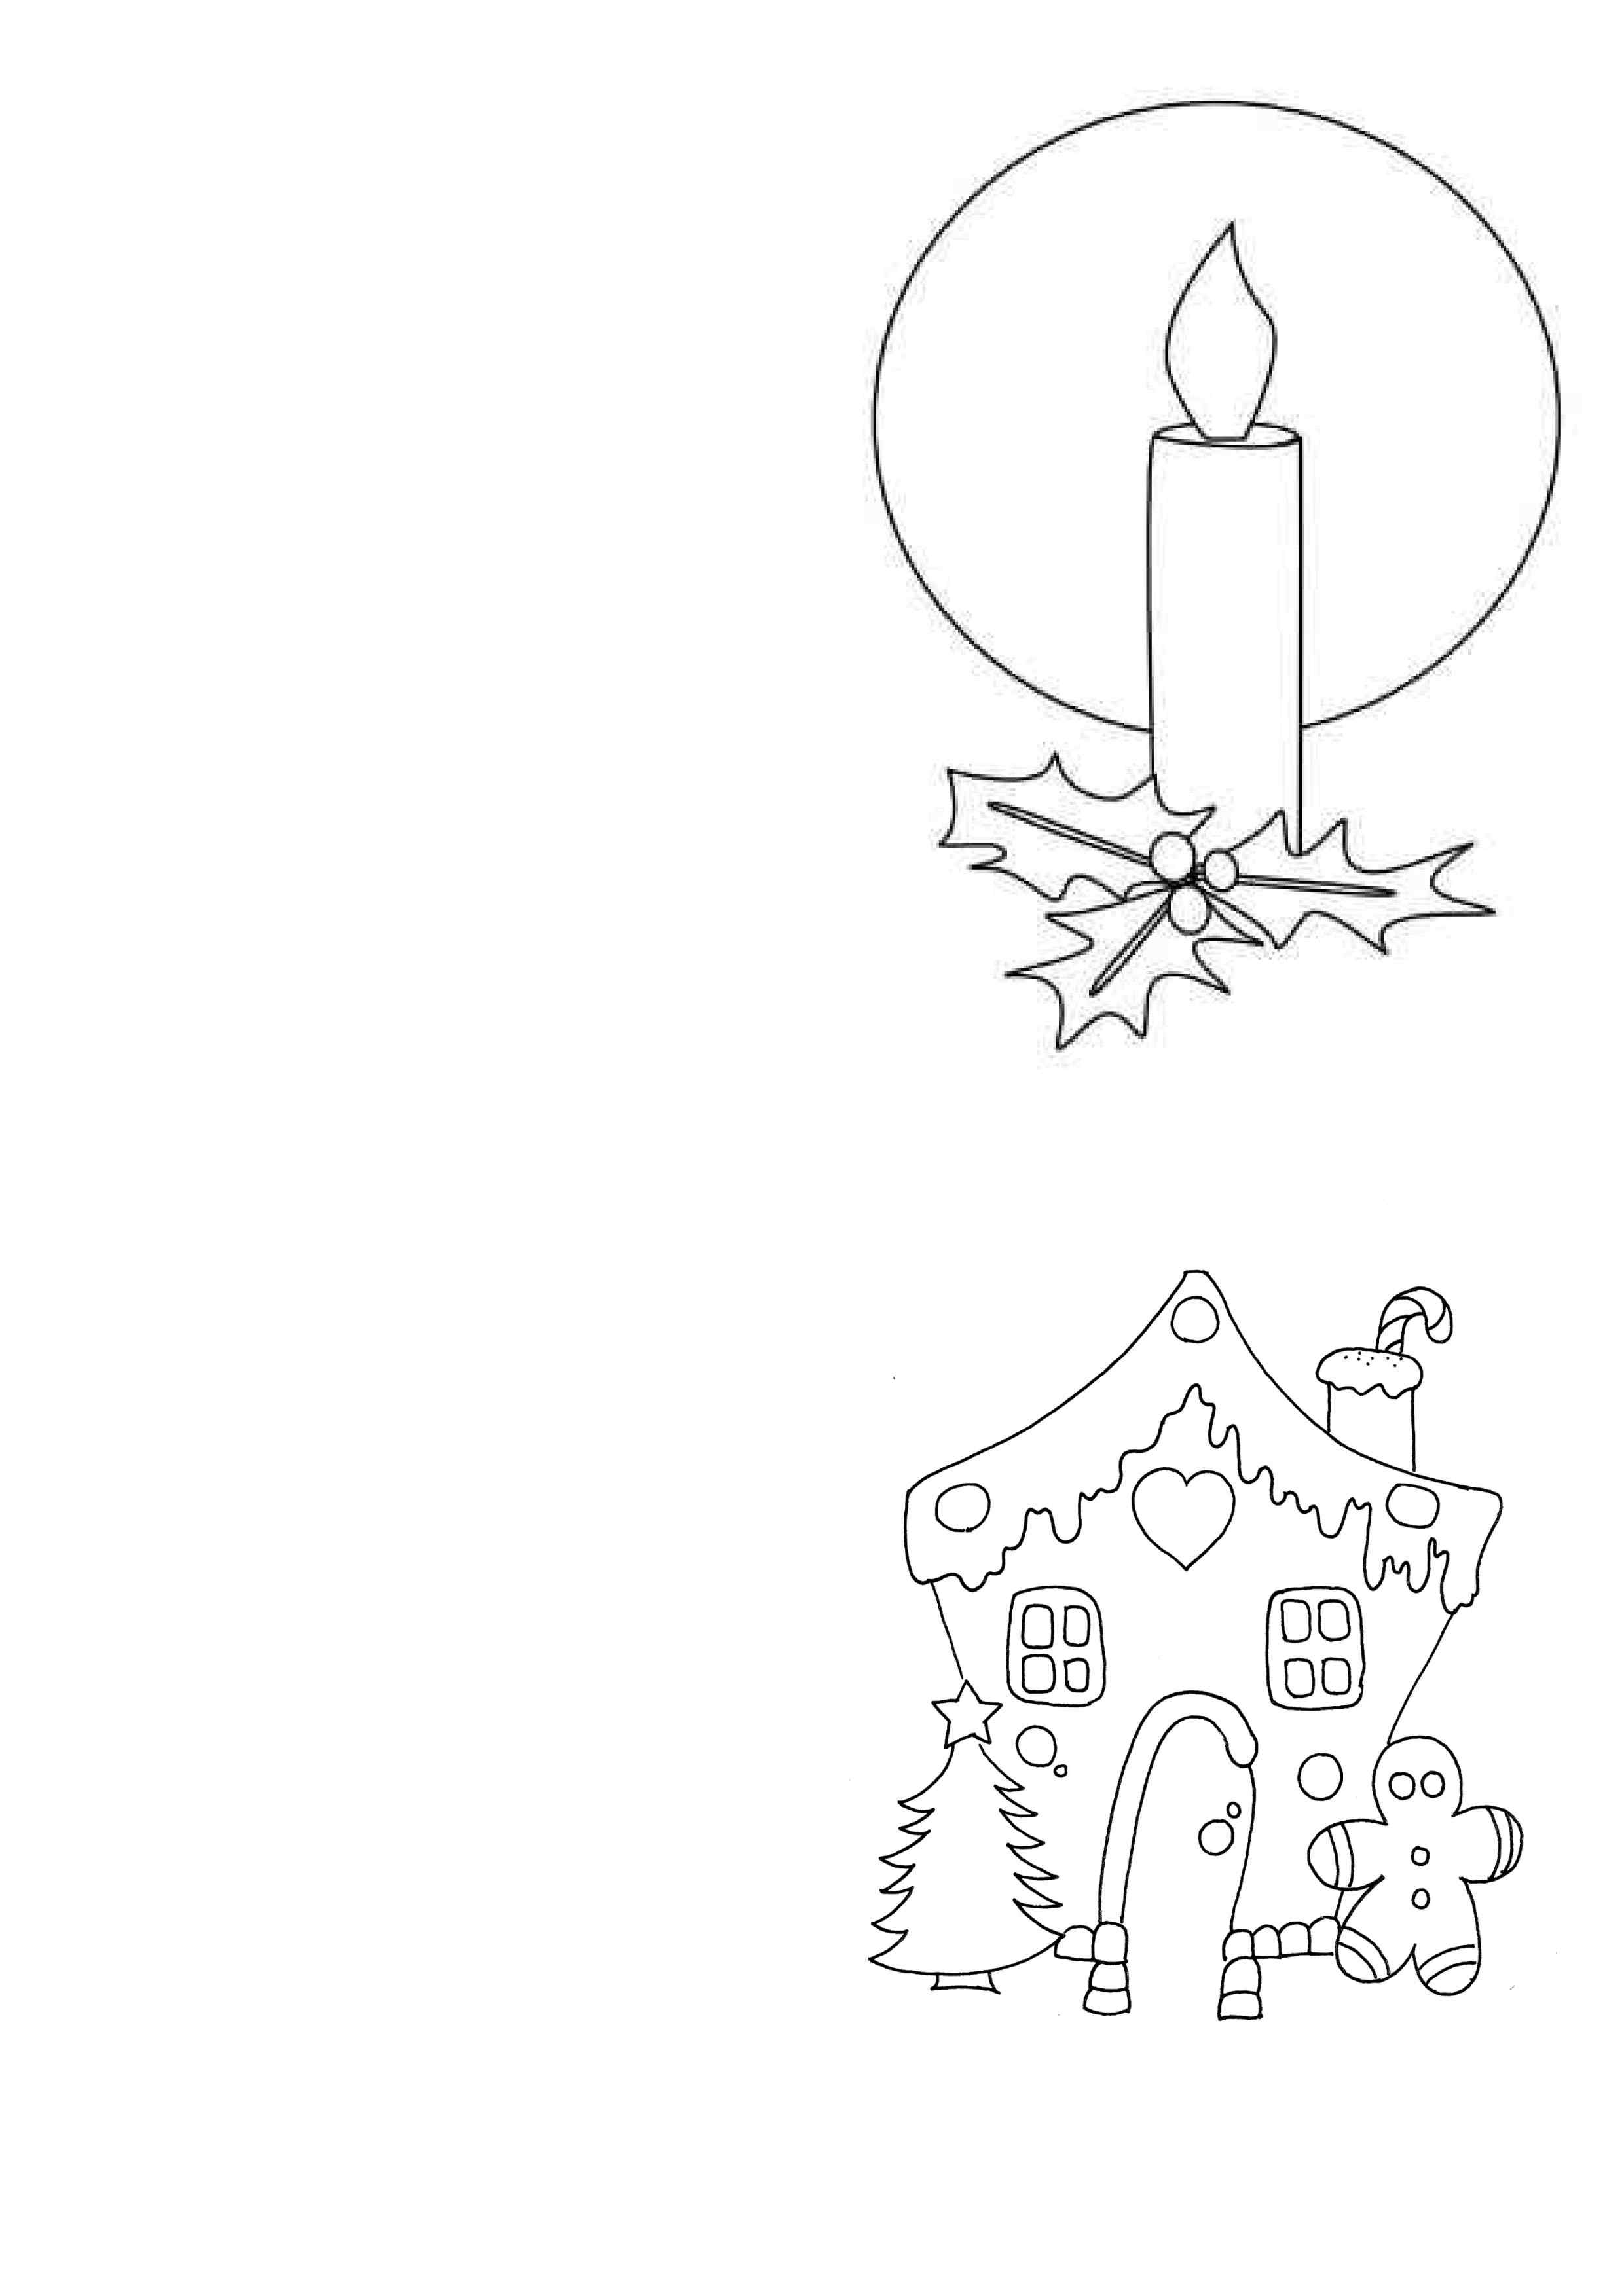 Easy Christmas Drawings at Explore